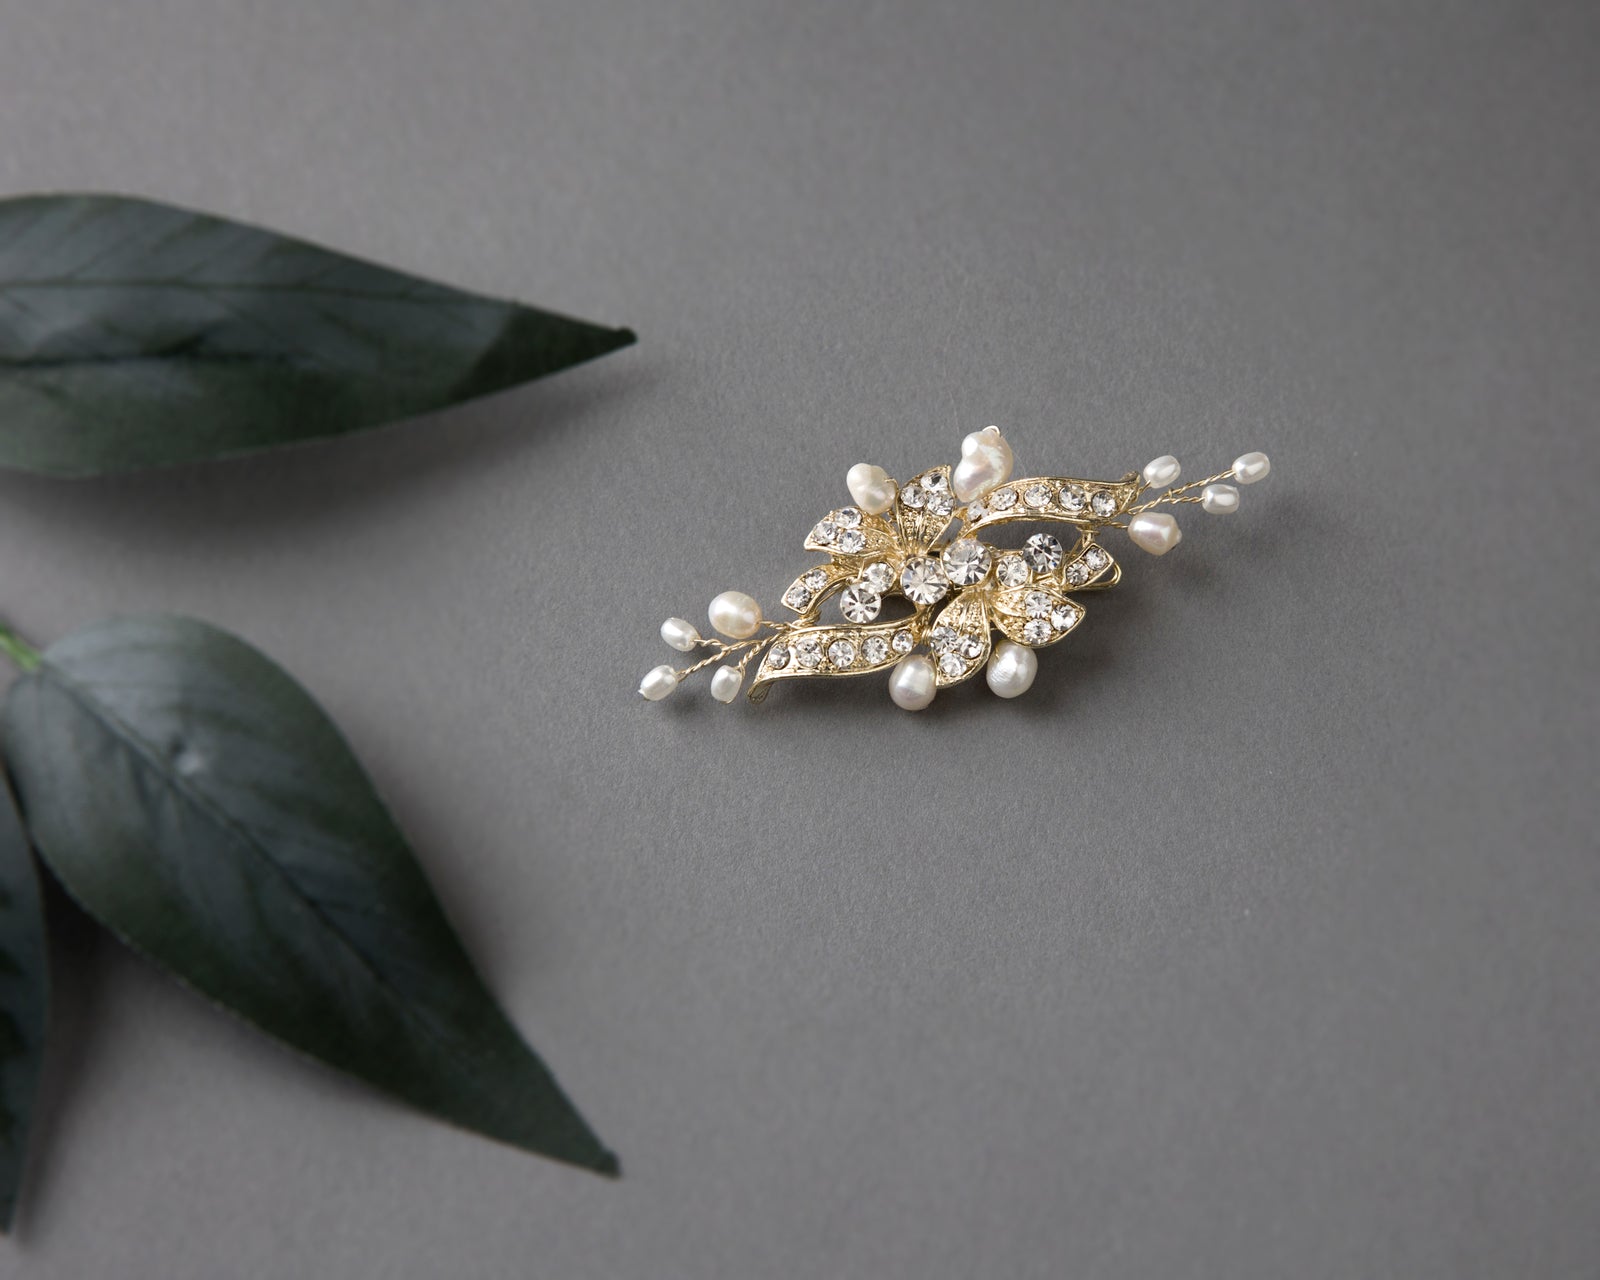 Small Gold Crystal and Pearl Floral Hair Clip - Cassandra Lynne